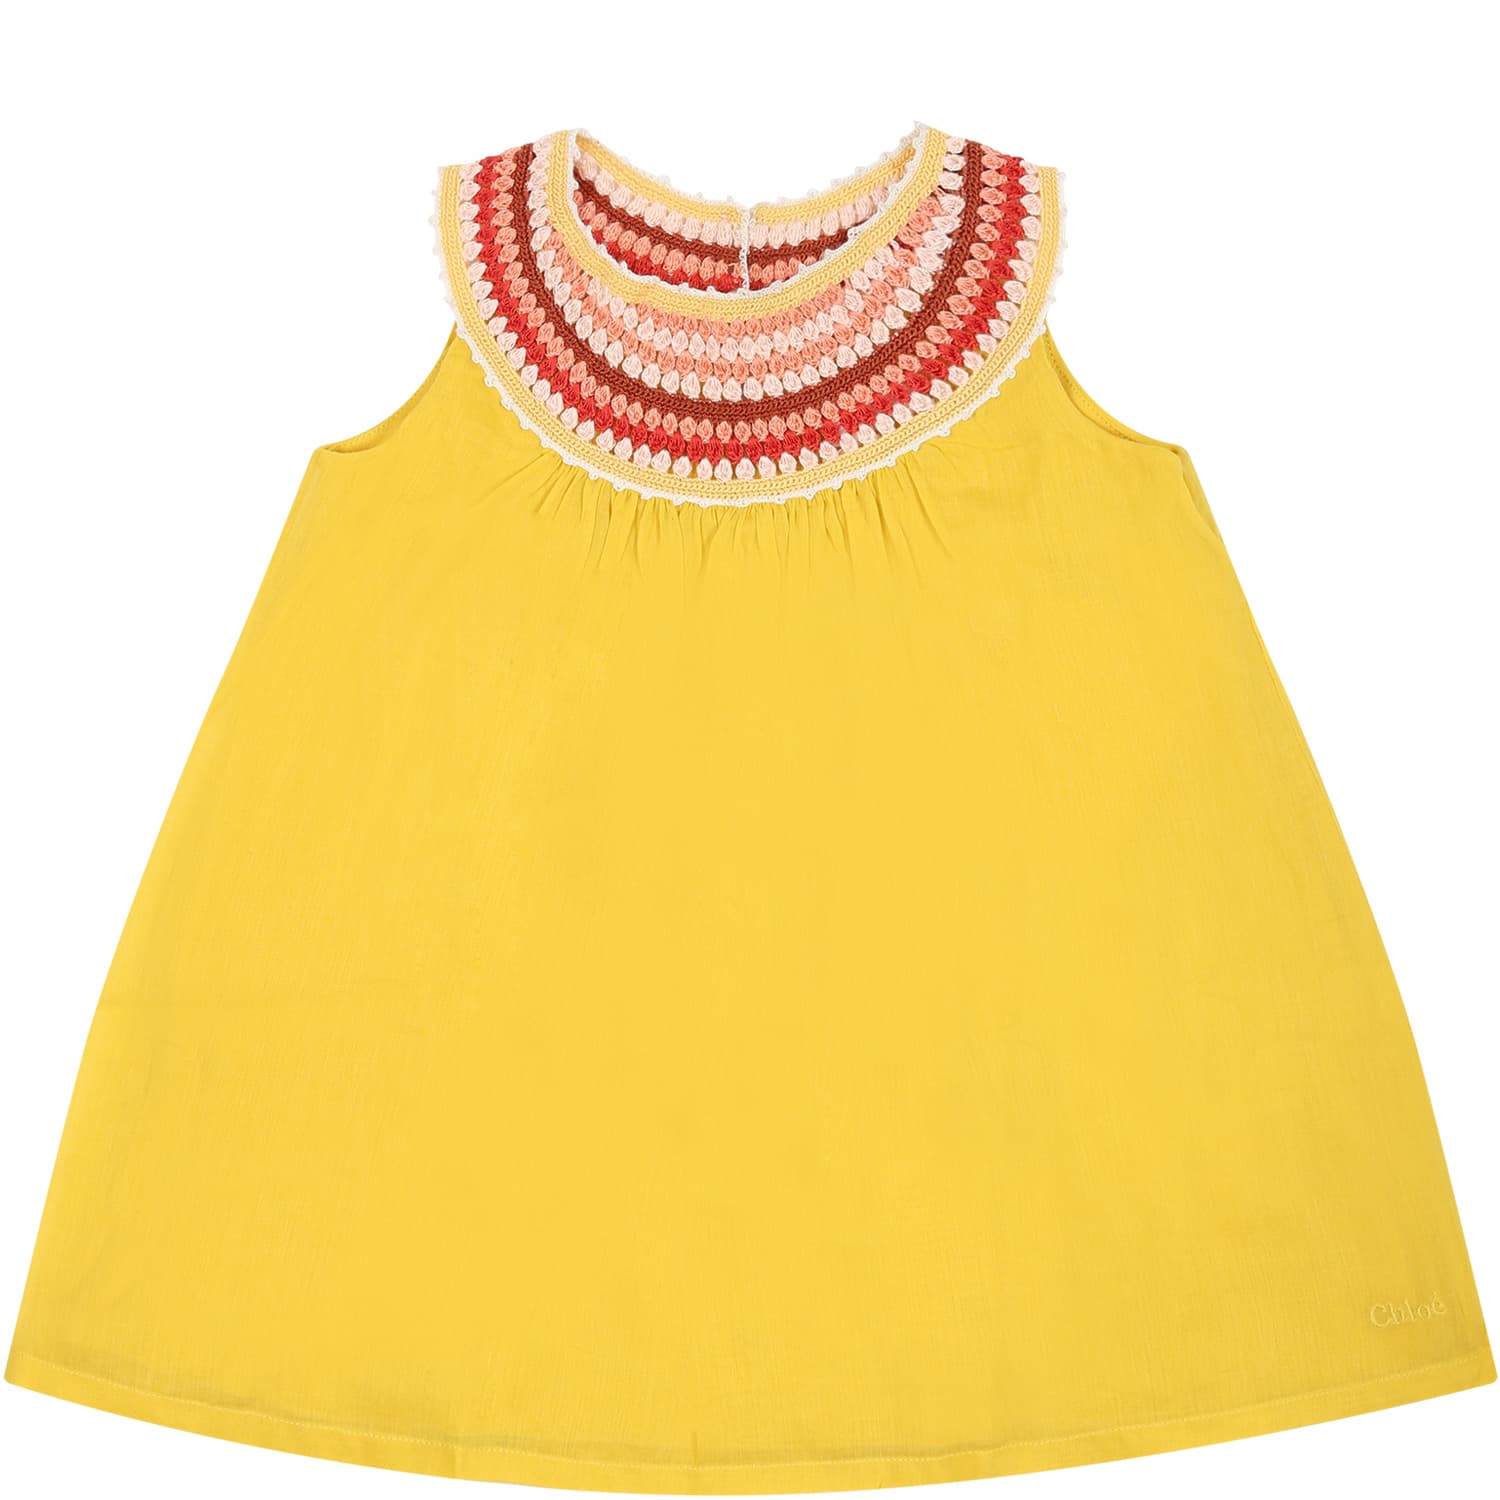 CHLOÉ YELLOW DRESS FOR BABY GIRL WITH MULTICOLOR EMBROIDERY